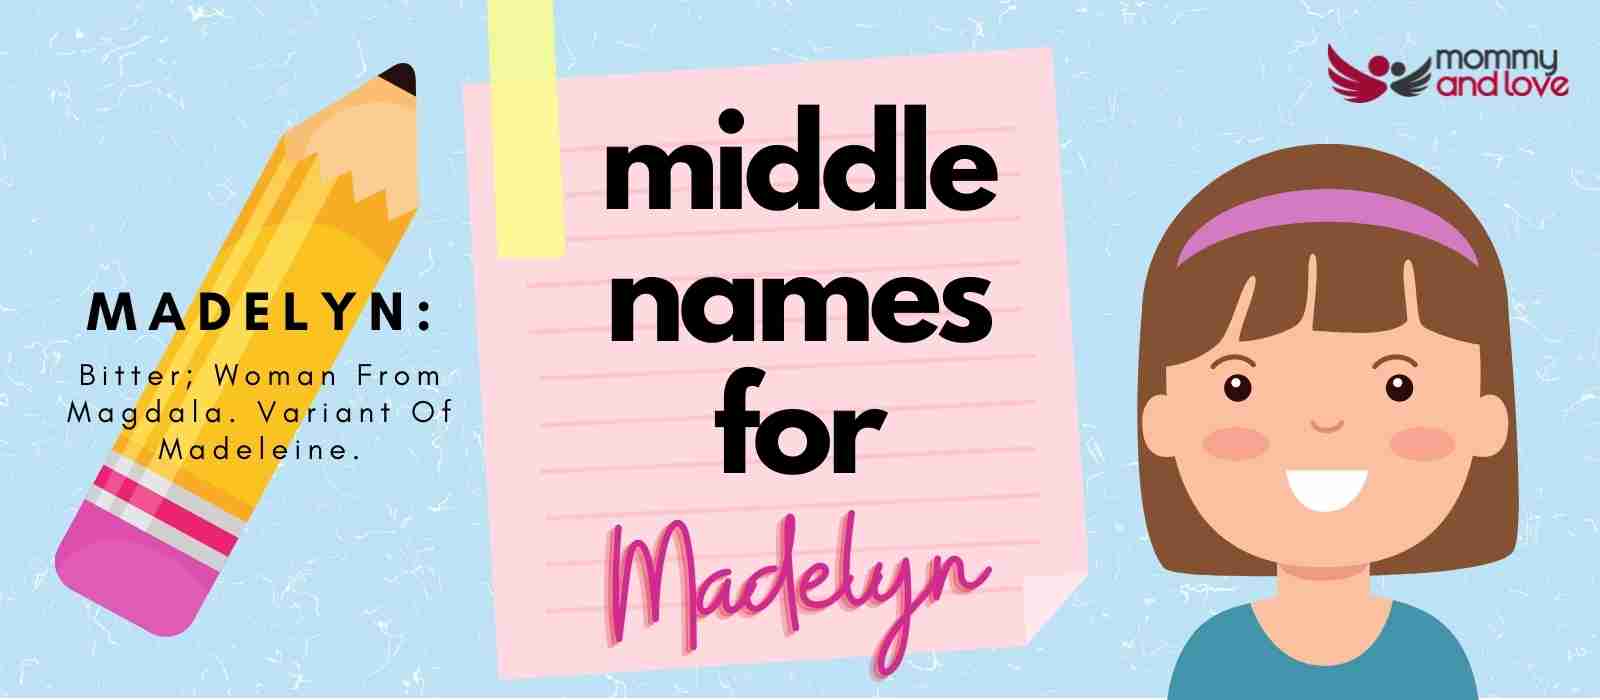 Middle Names for Madelyn